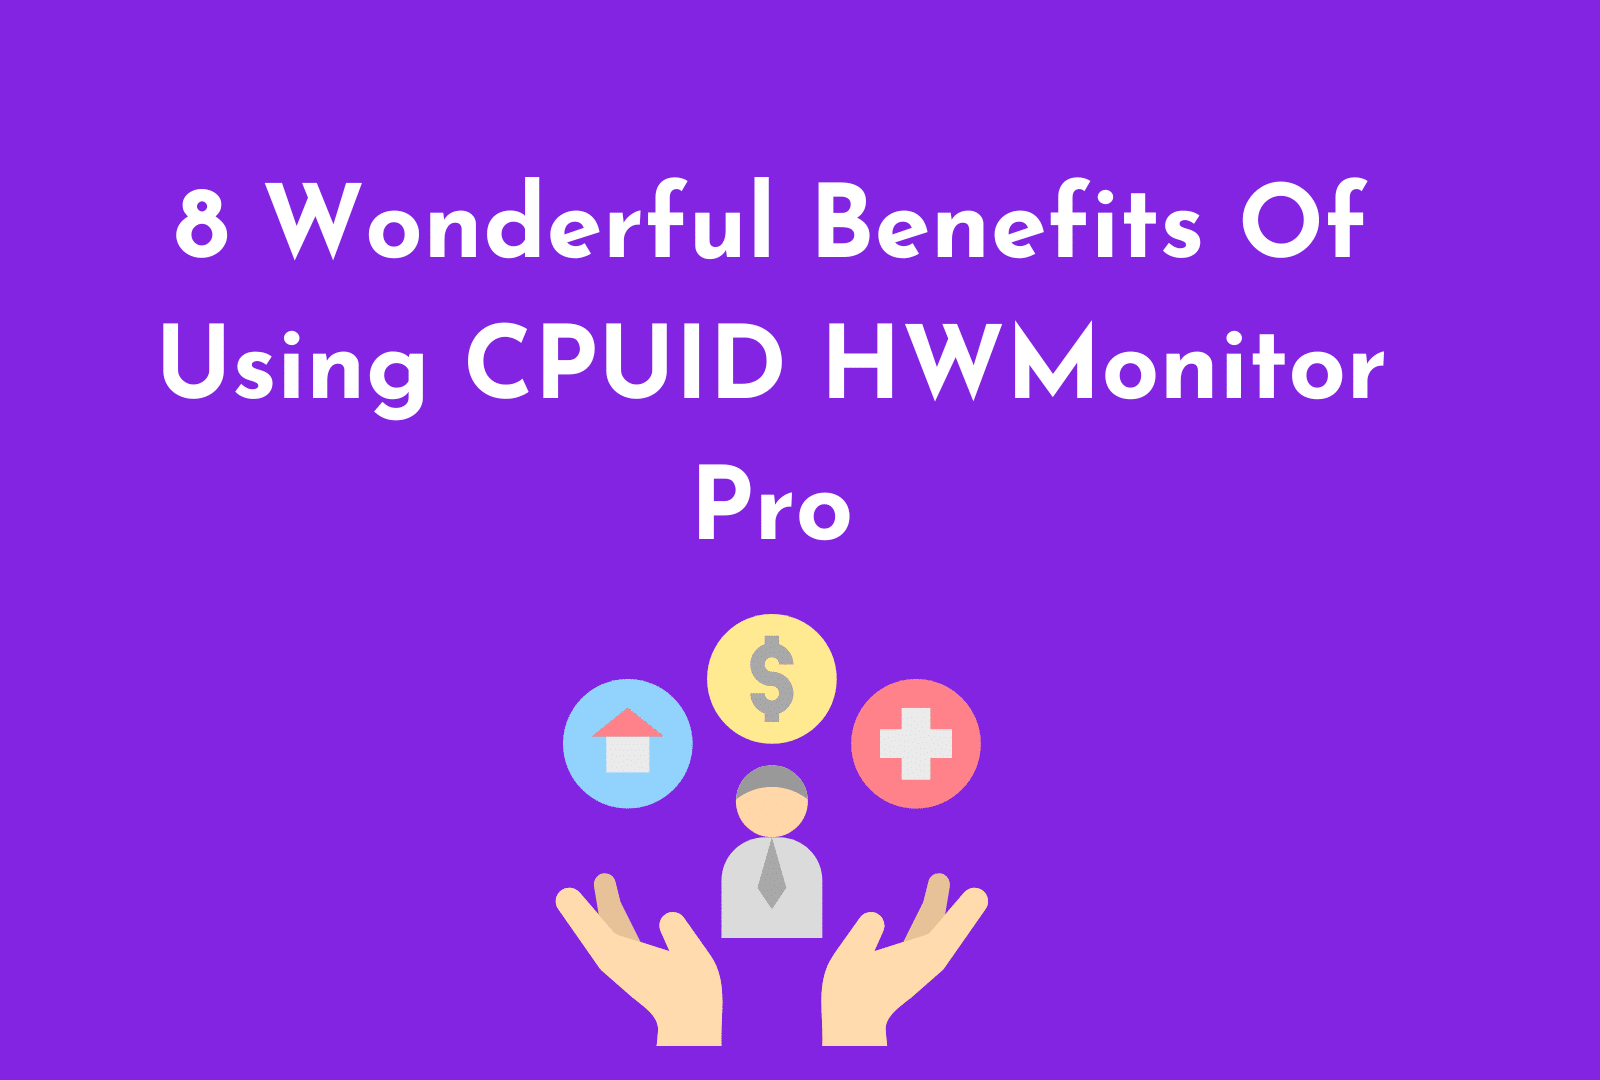 C:\Users\Mohsin\Downloads\8 Wonderful Benefits Of Using CPUID HWMonitor Pro.png